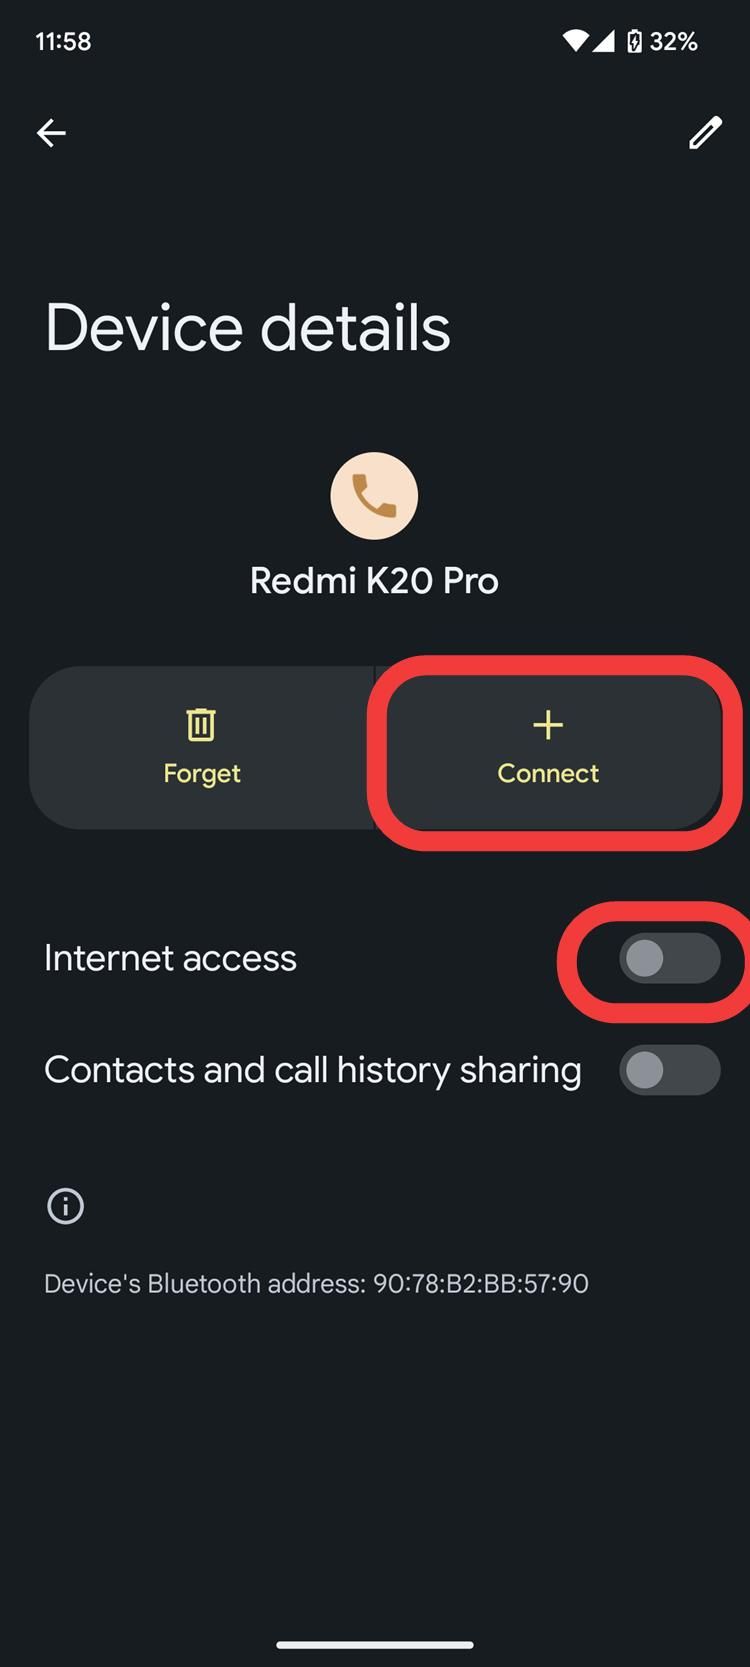 A screenshot of Android settings showing how to connect via Bluetooth and switch on internet access.